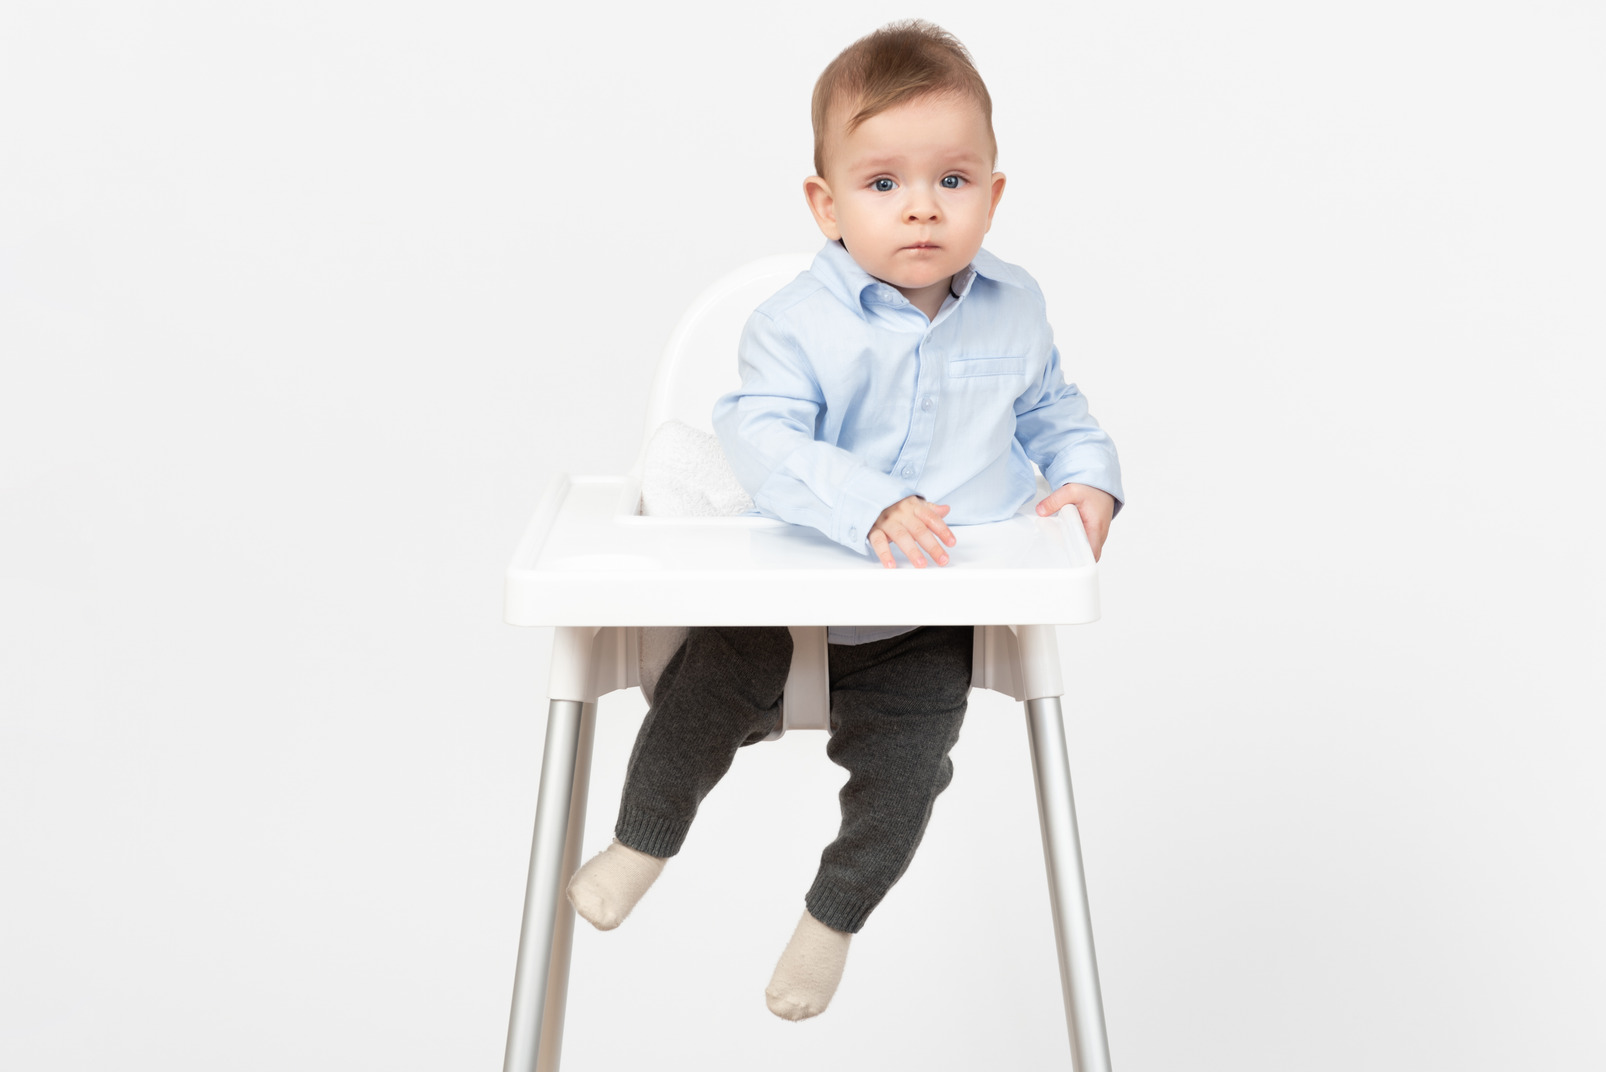 Adorable little baby boy sitting in highchair